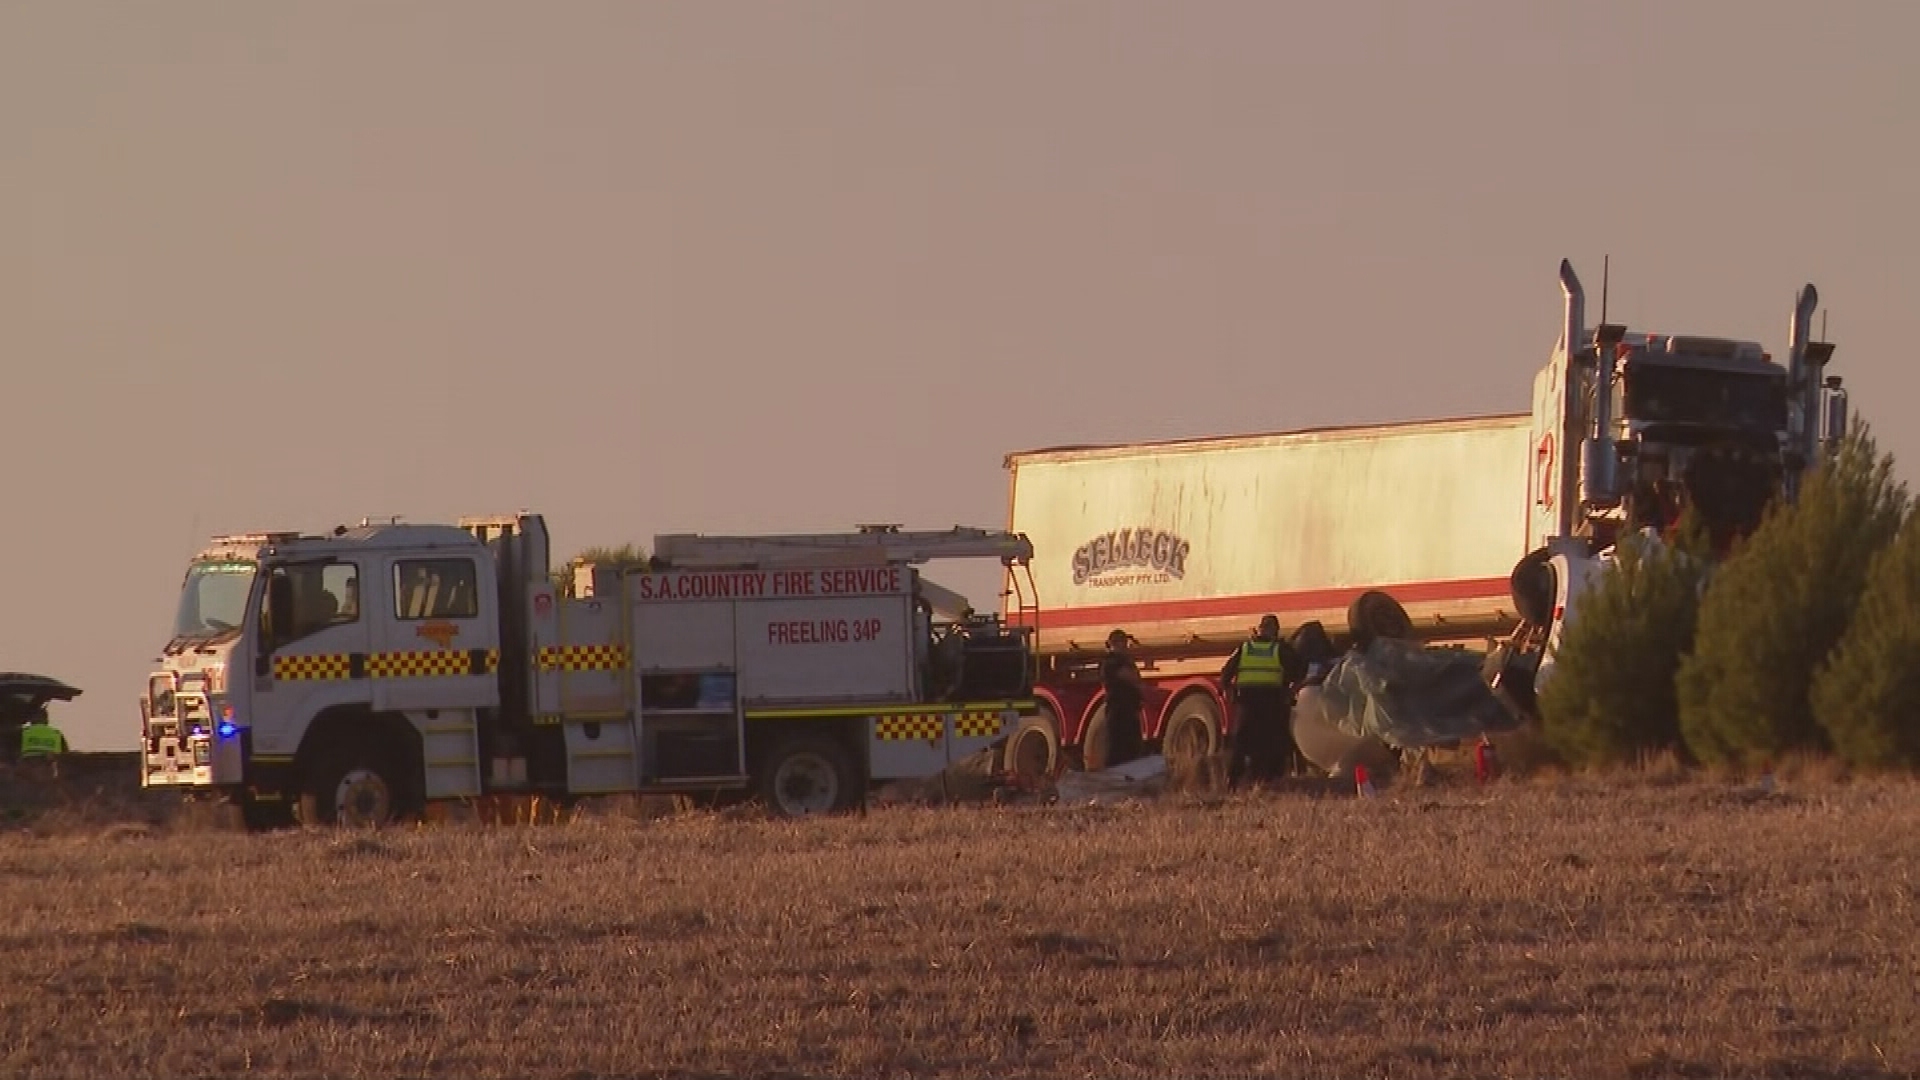 Two people killed after crash with truck in South Australia